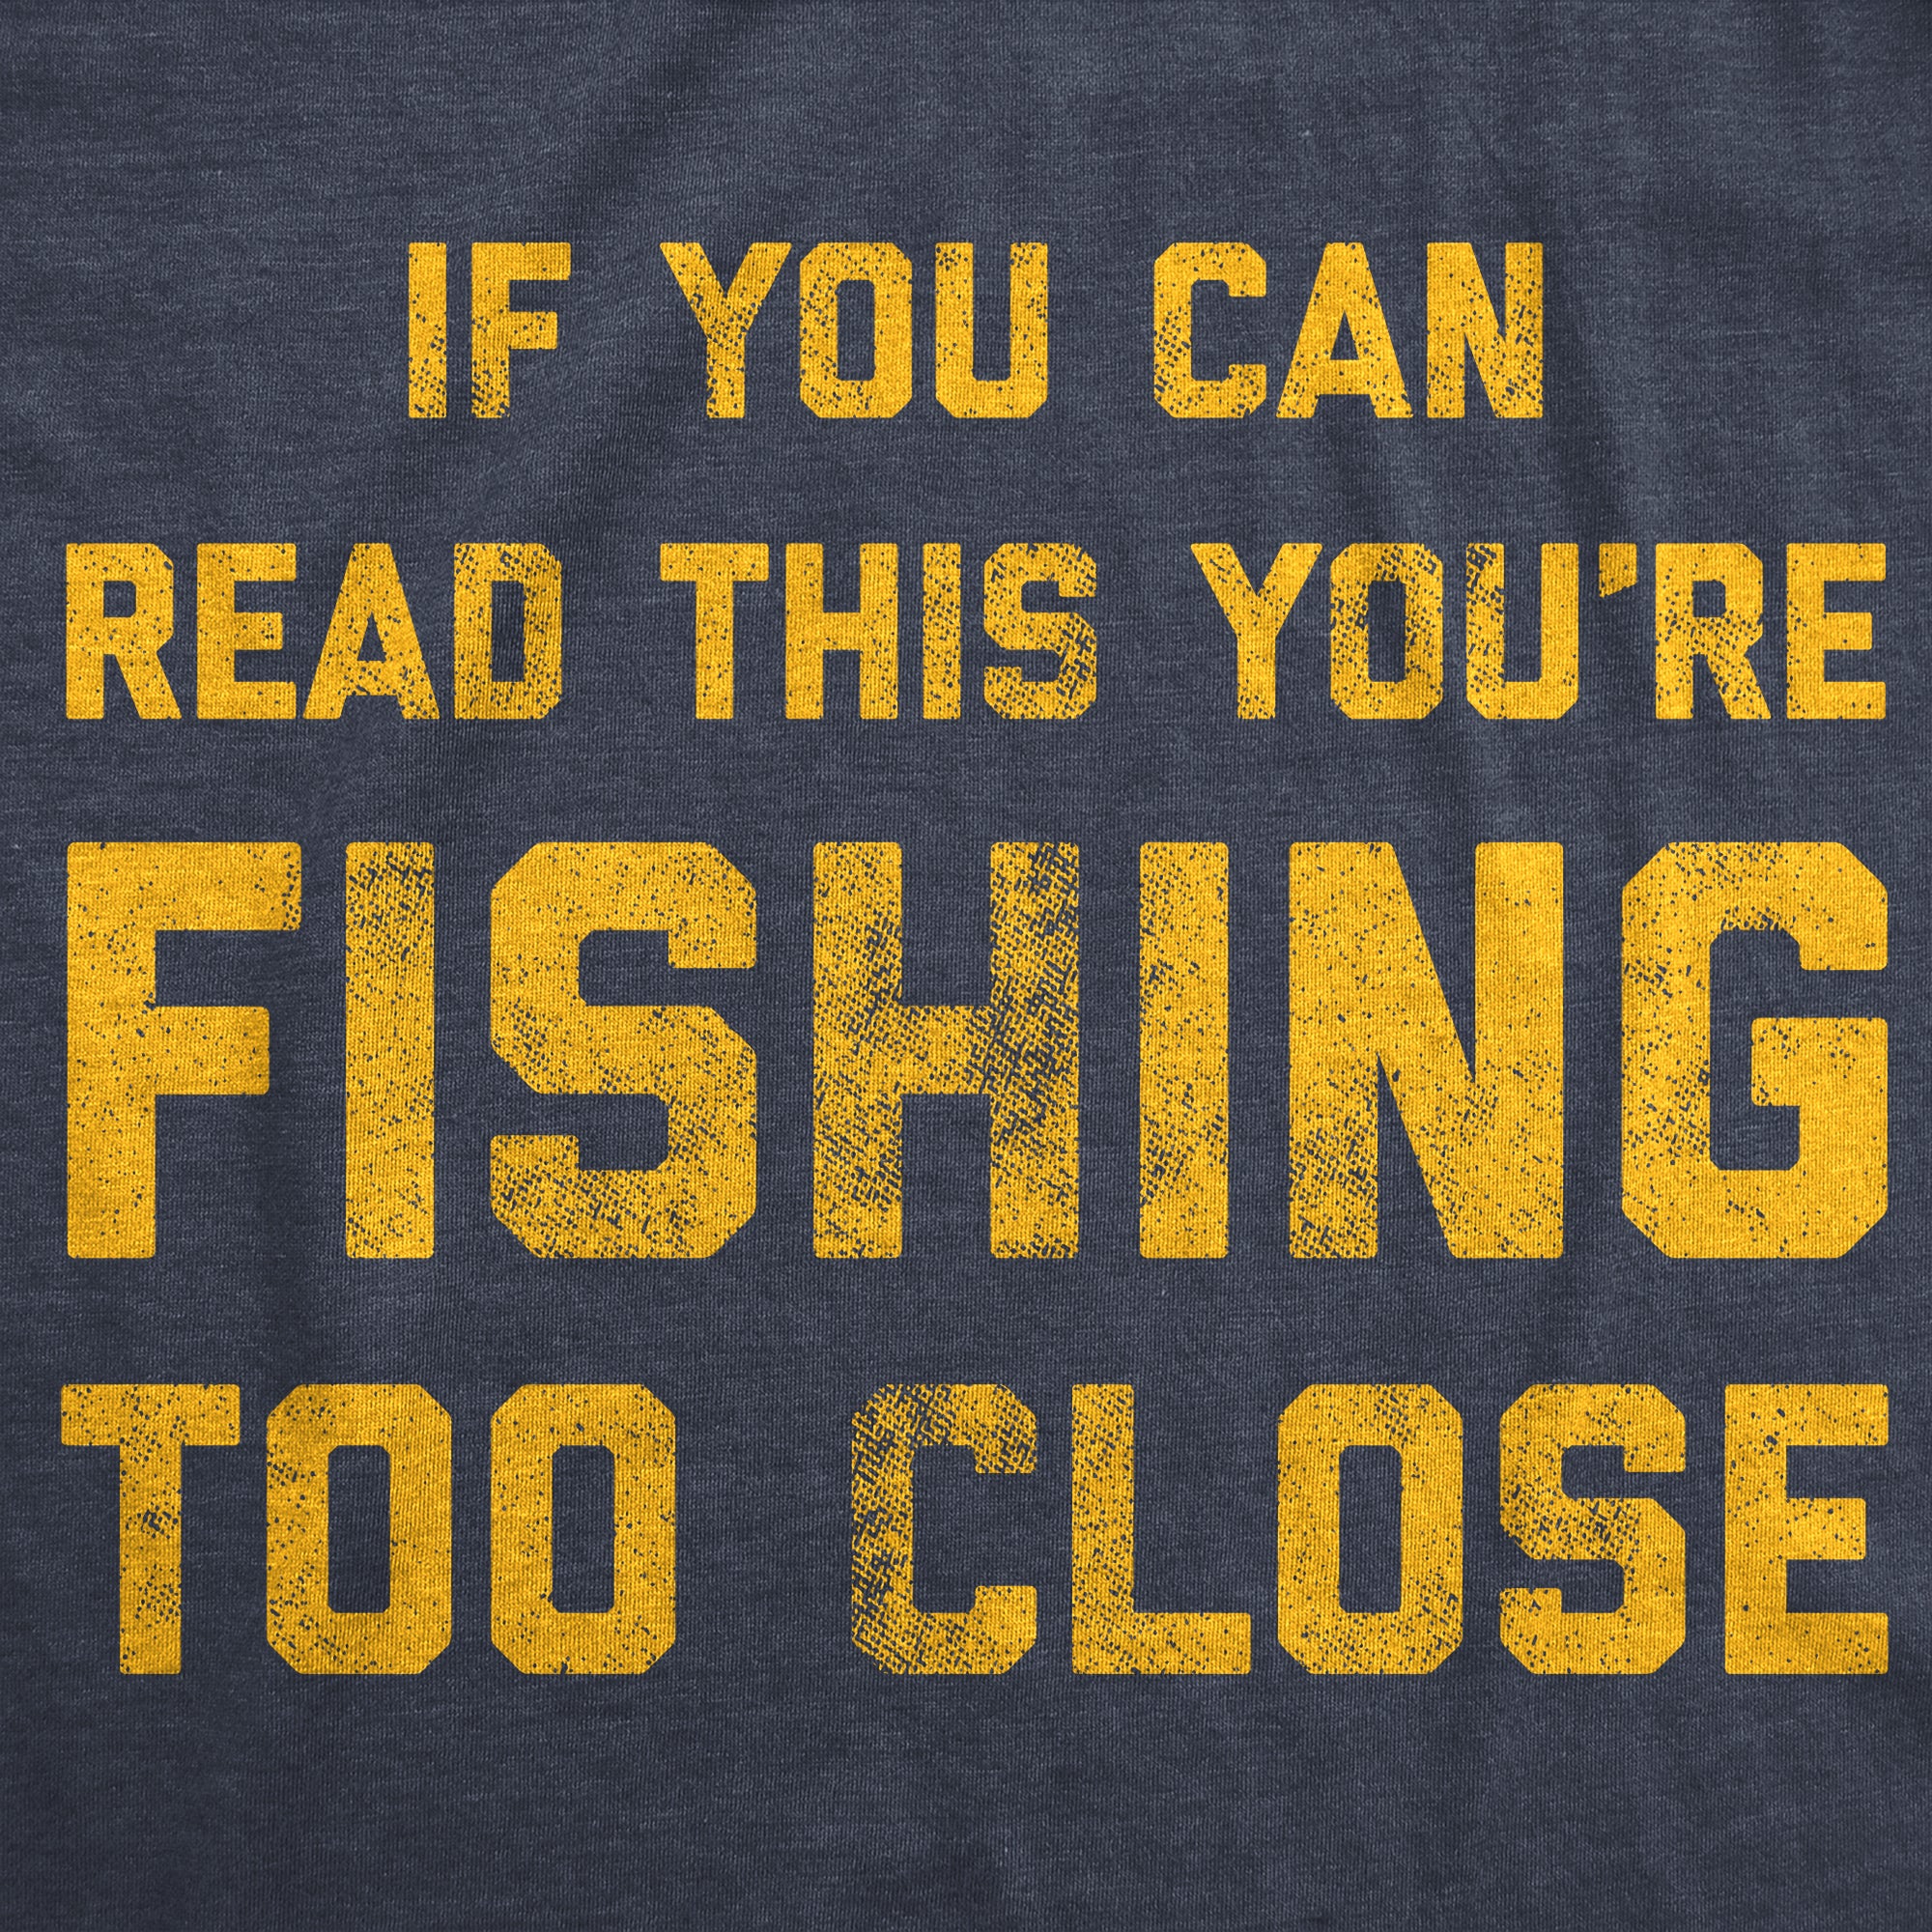 Funny Heather Navy - Too Close If You Can Read This You're Fishing Too Close Mens T Shirt Nerdy Fishing Tee